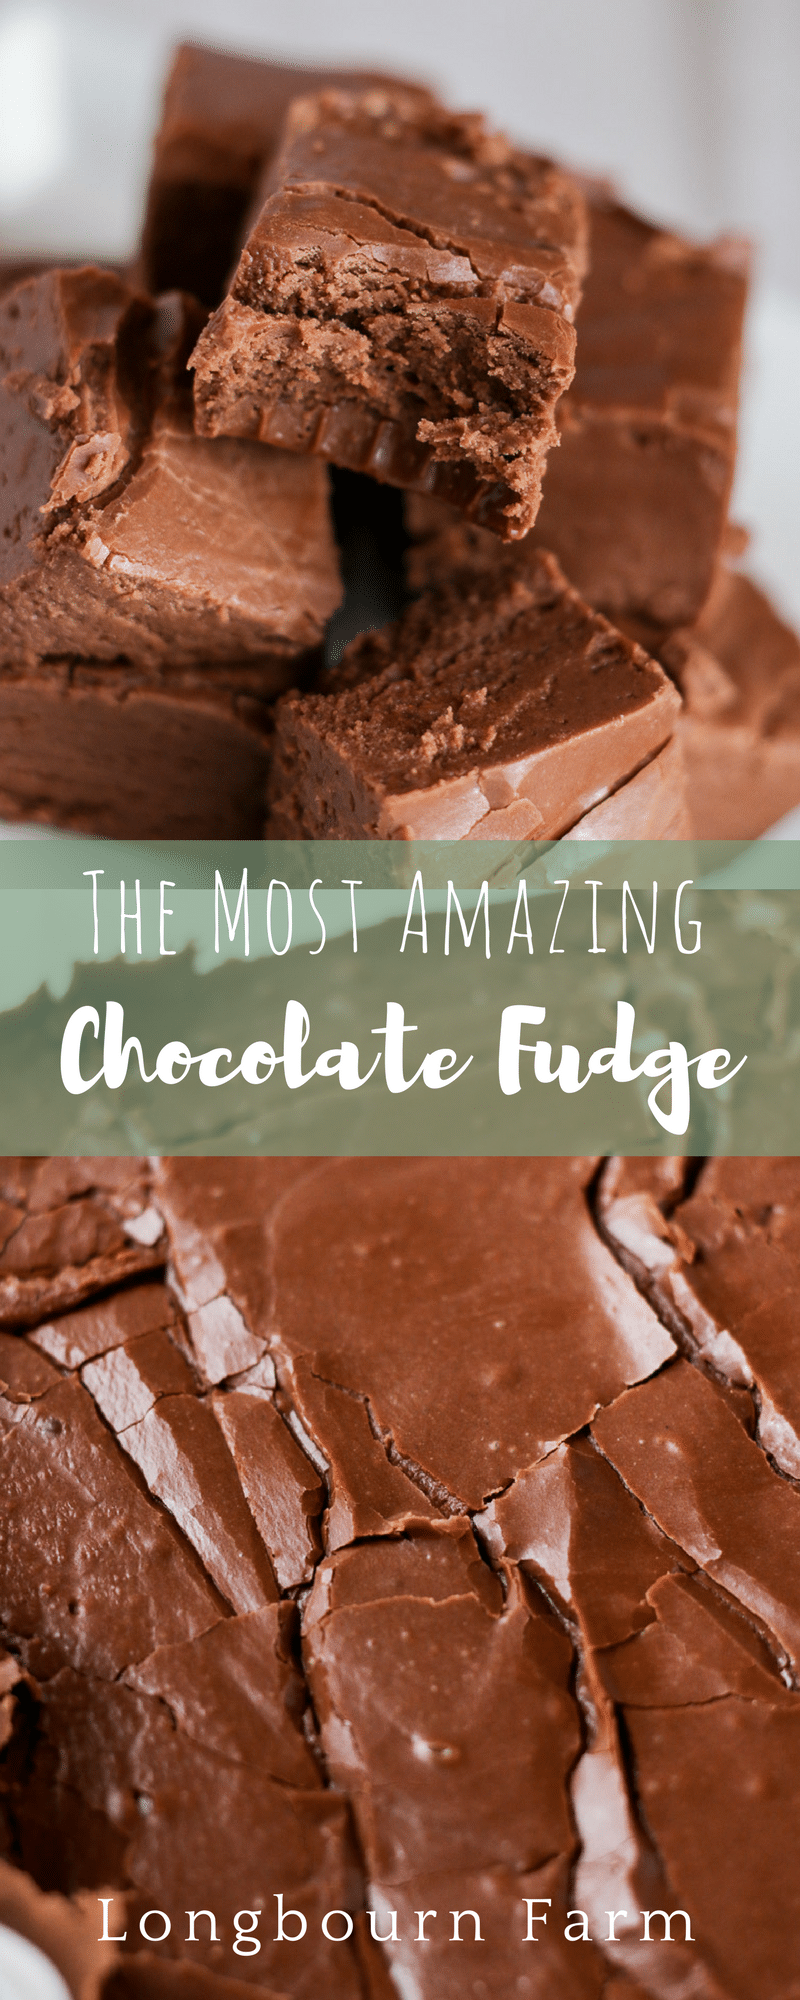 This chocolate fudge recipe is smooth, rich, and perfect for any occasion or party! Easy to make and even better than any you could purchase!